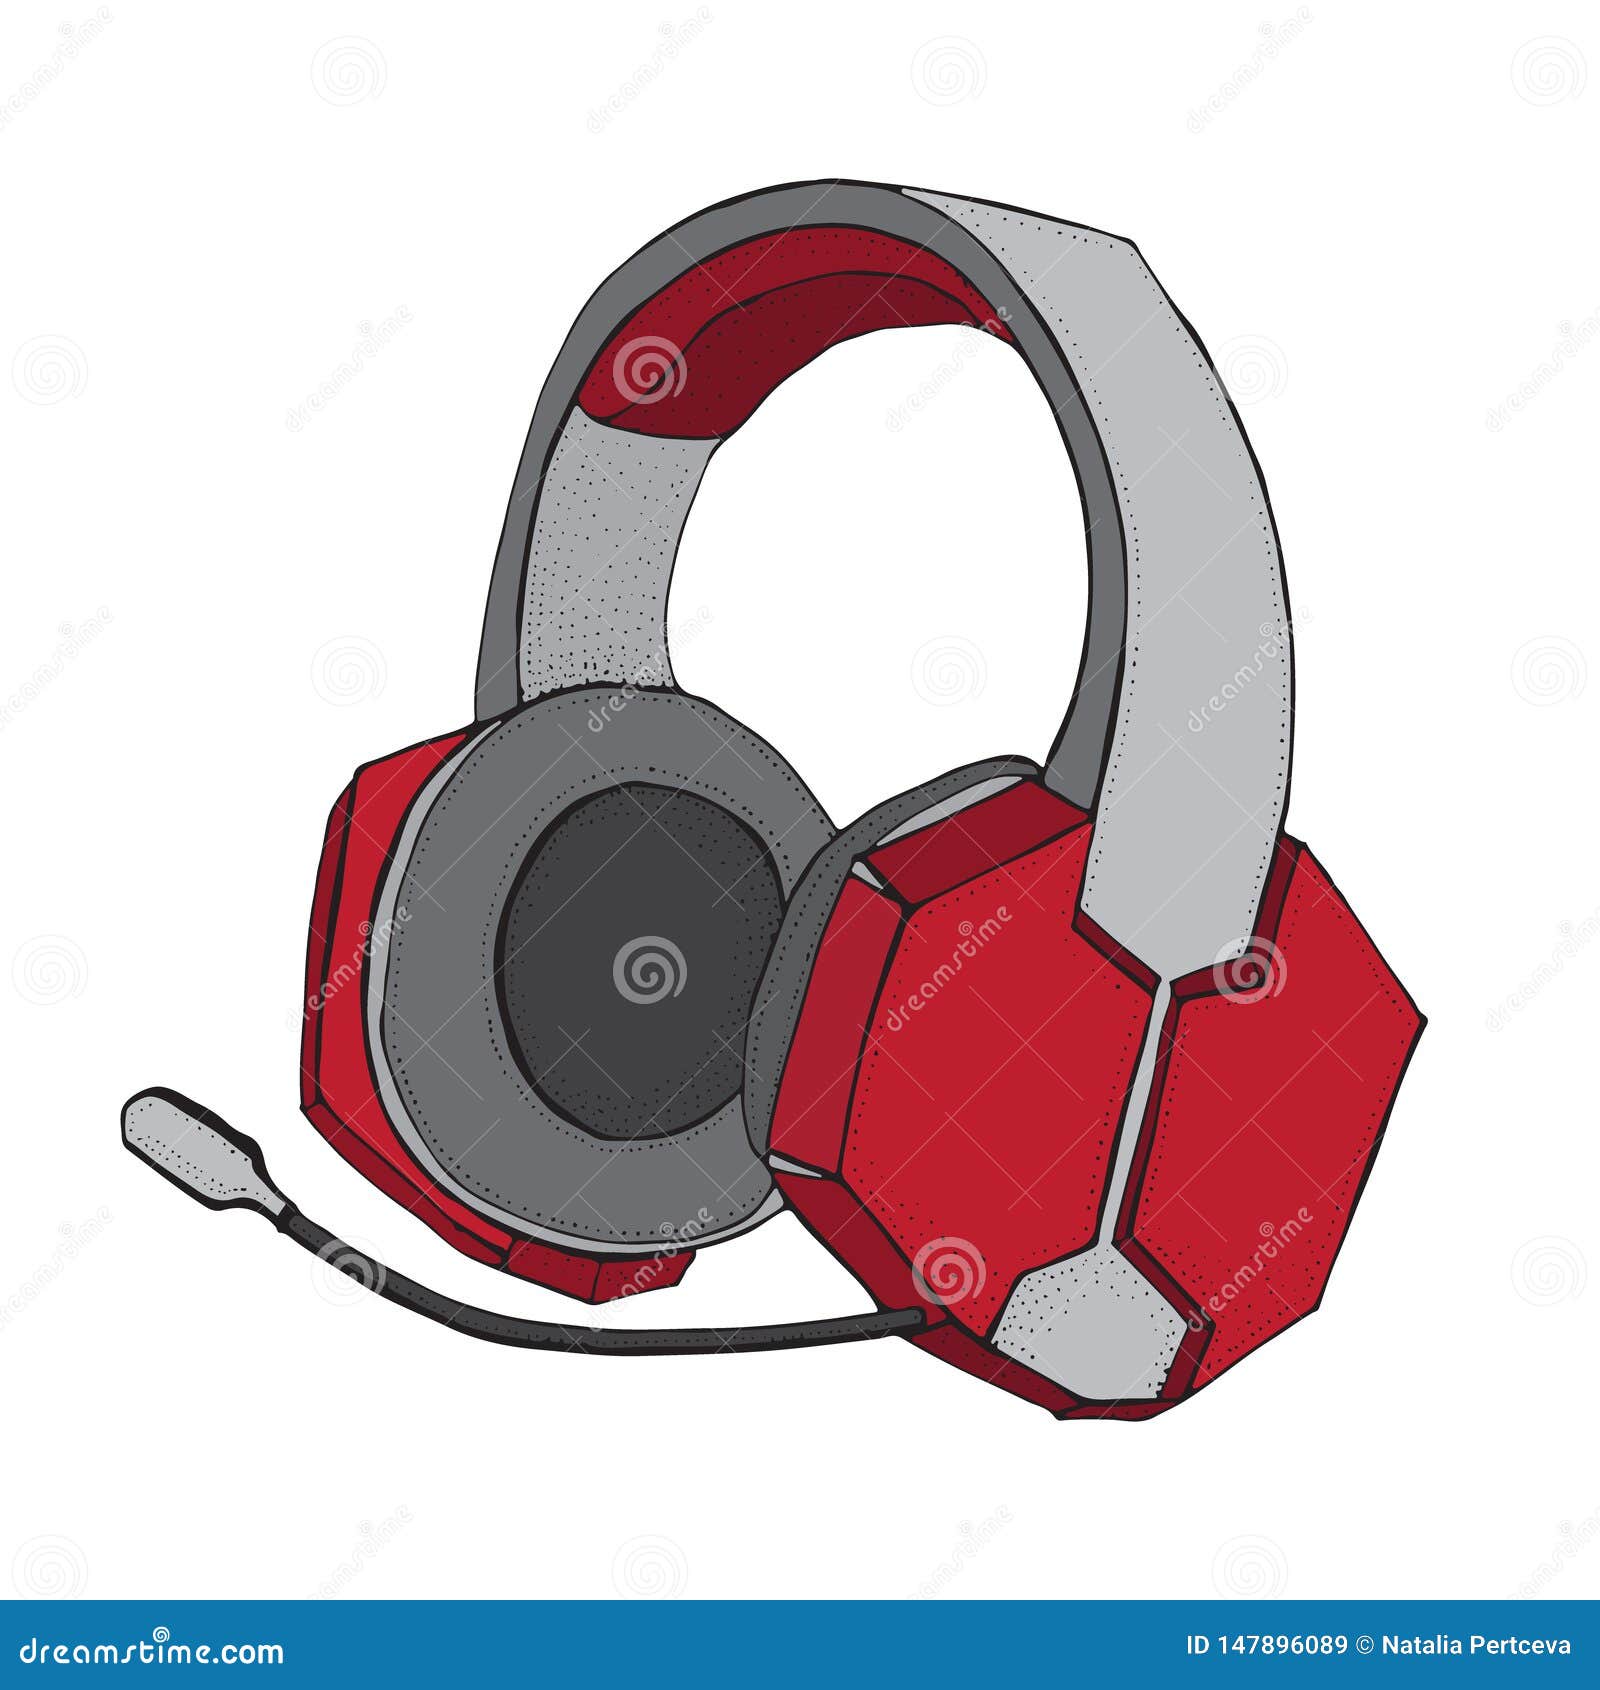 Red Headphones with Microphone for Music and Video Games Isolated on